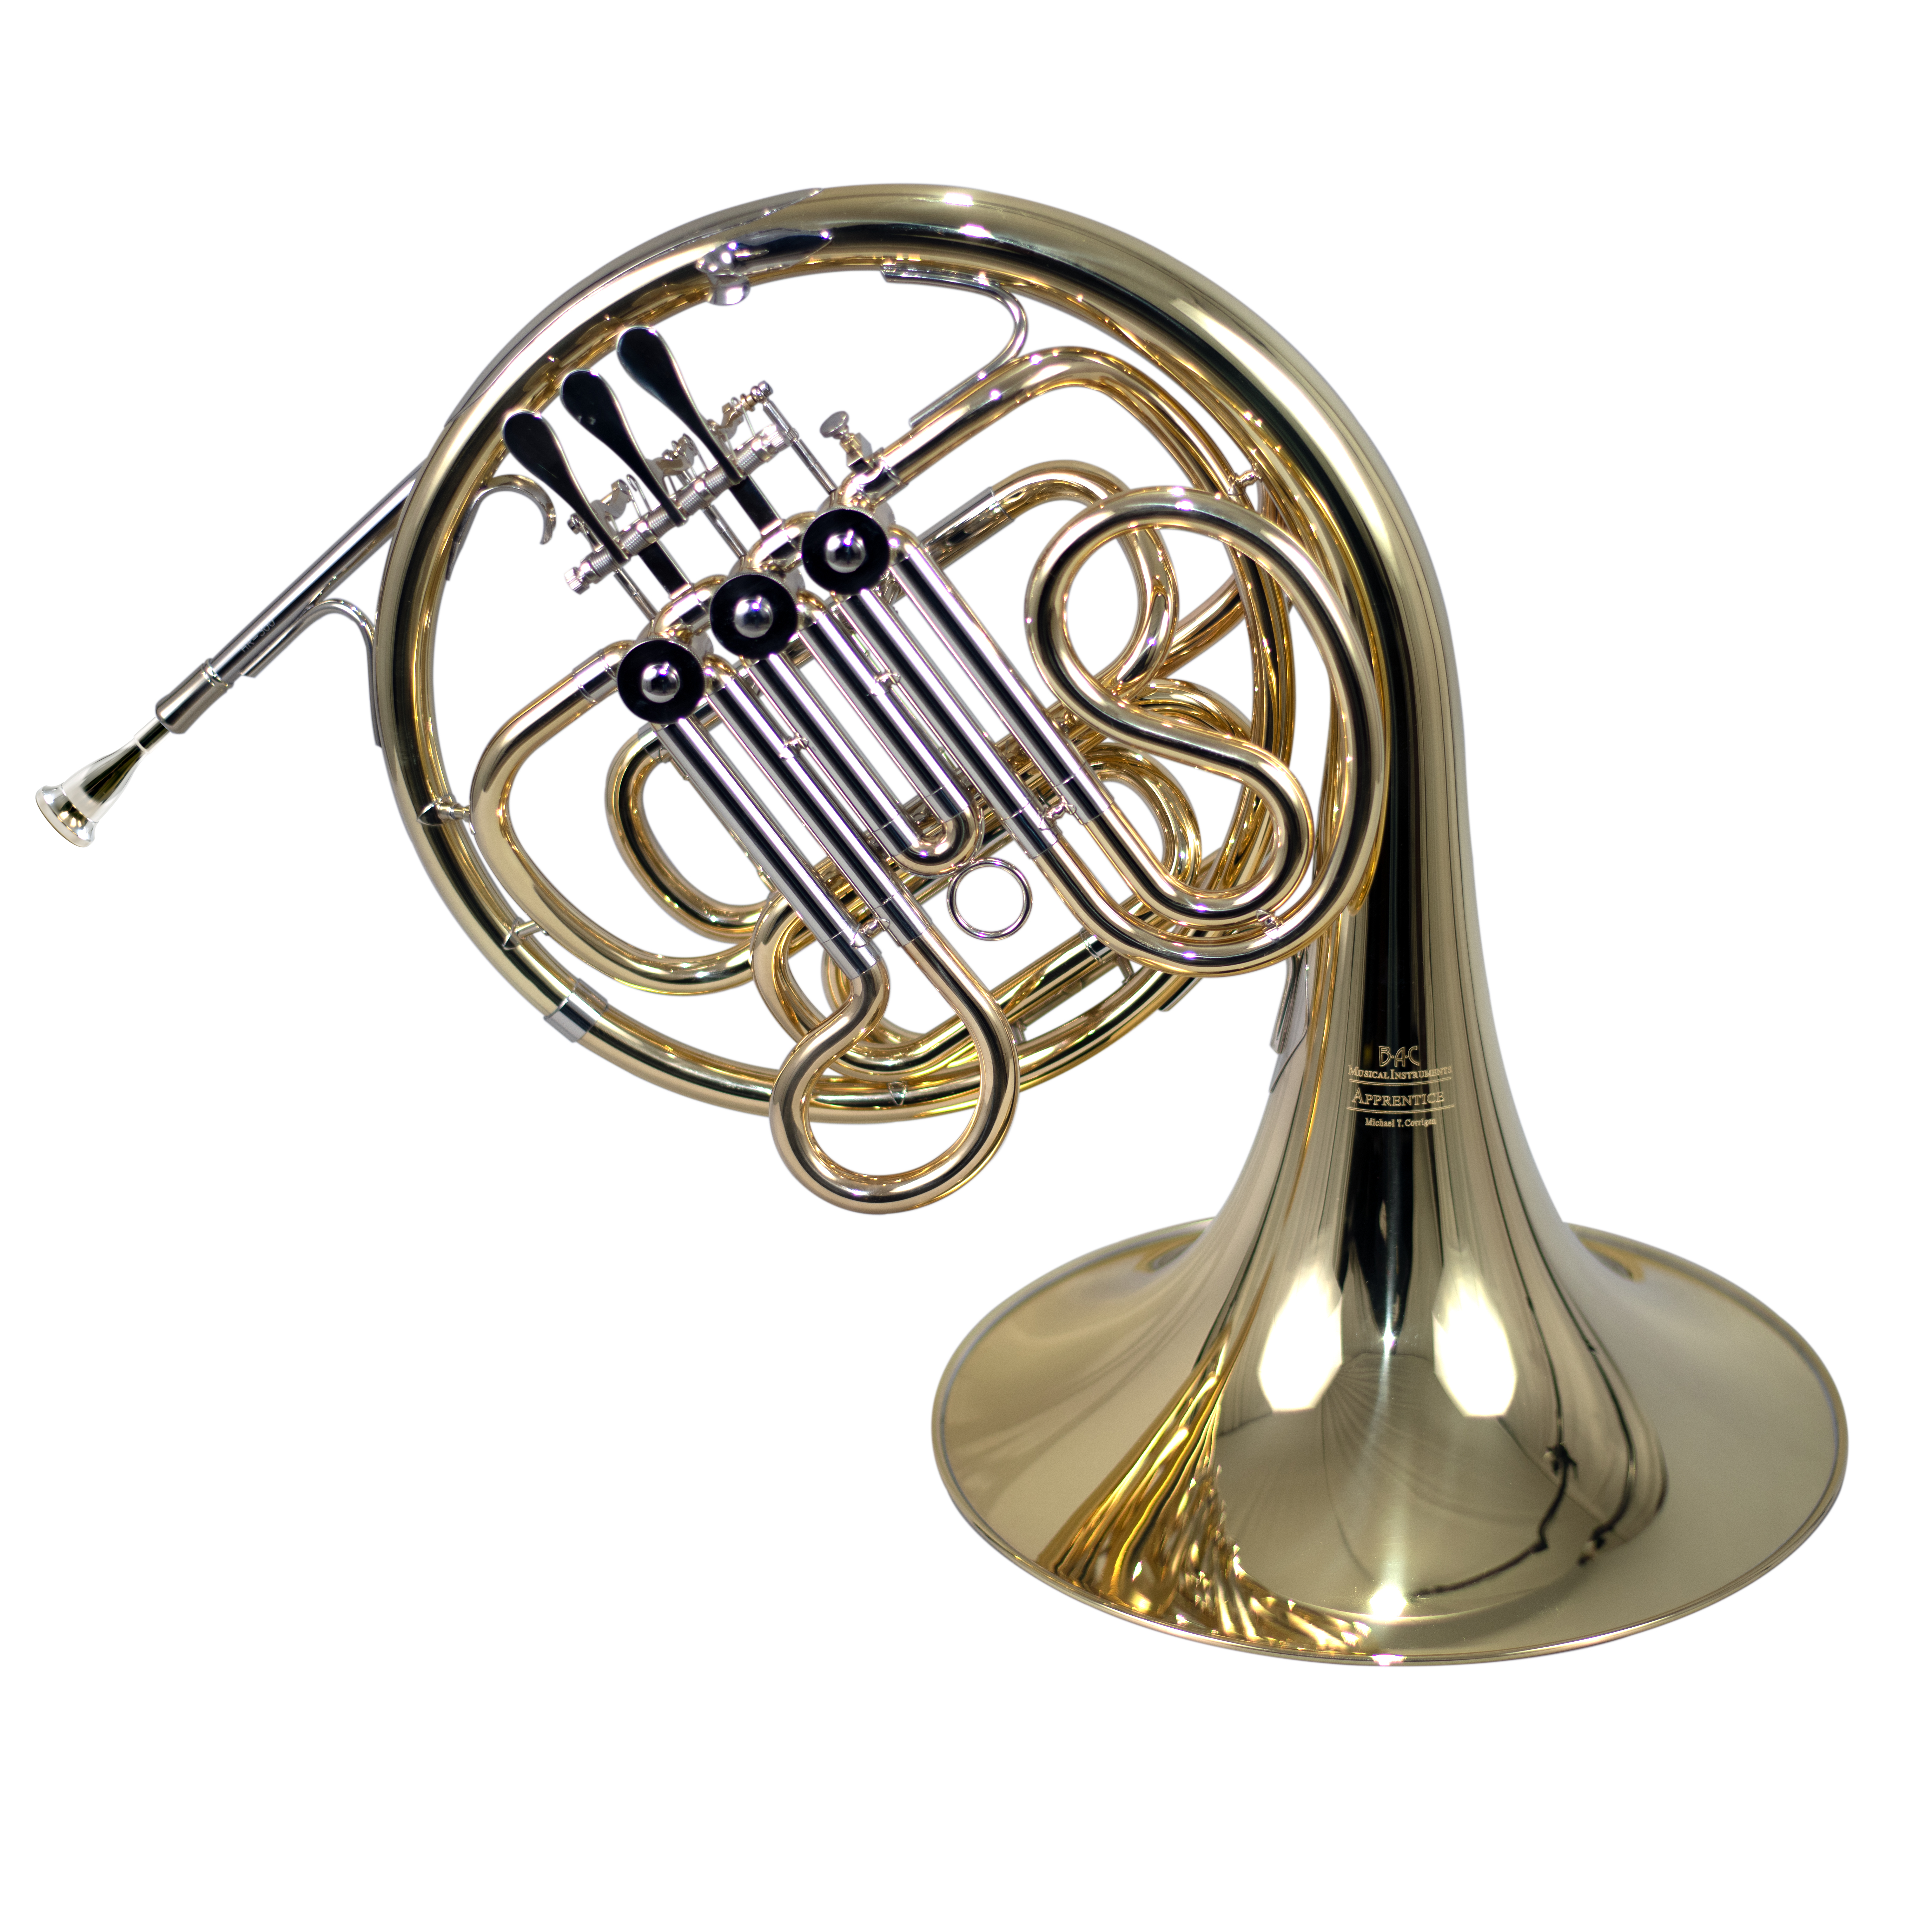  BAC Single French Horn